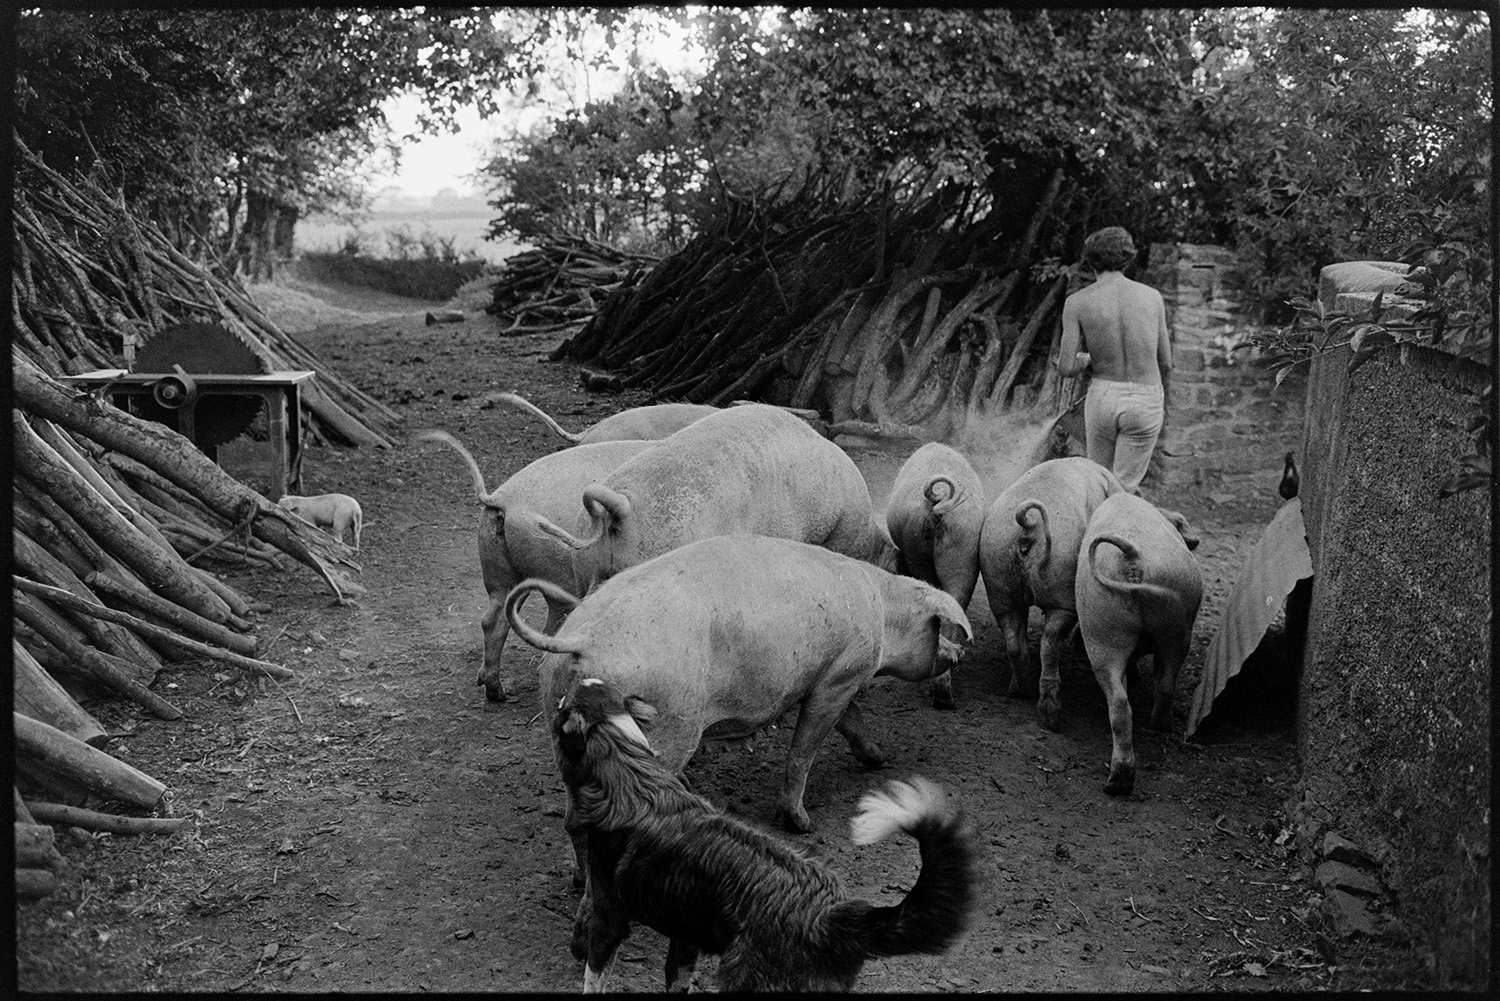 Pigs in lane. 
[A member of the Ward family leading seven pigs down a lane at Parsonage, Iddesleigh. The lane has woodpiles on either side and a circular saw can be seen. A dog is following the pigs in the foreground.]